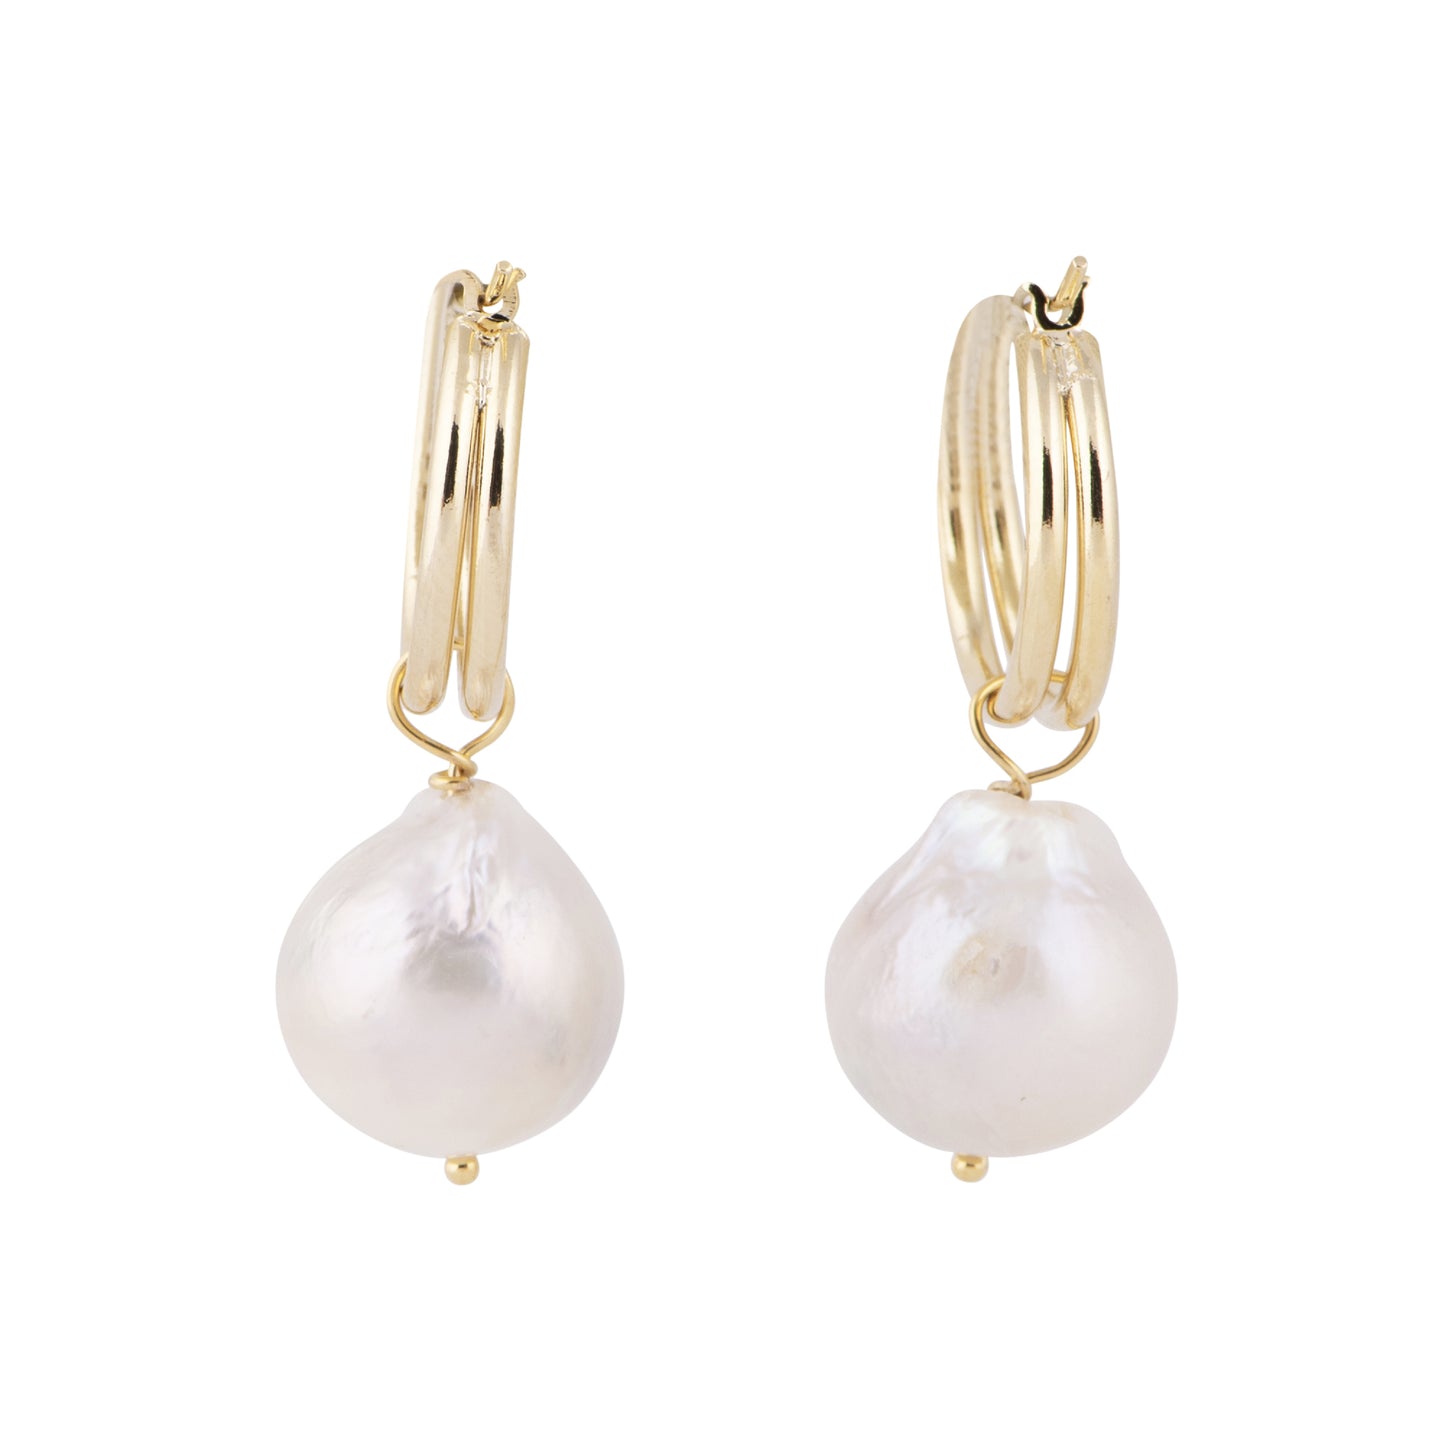 Hydra - Gold clasp earrings with baroque pearl (White pearls)